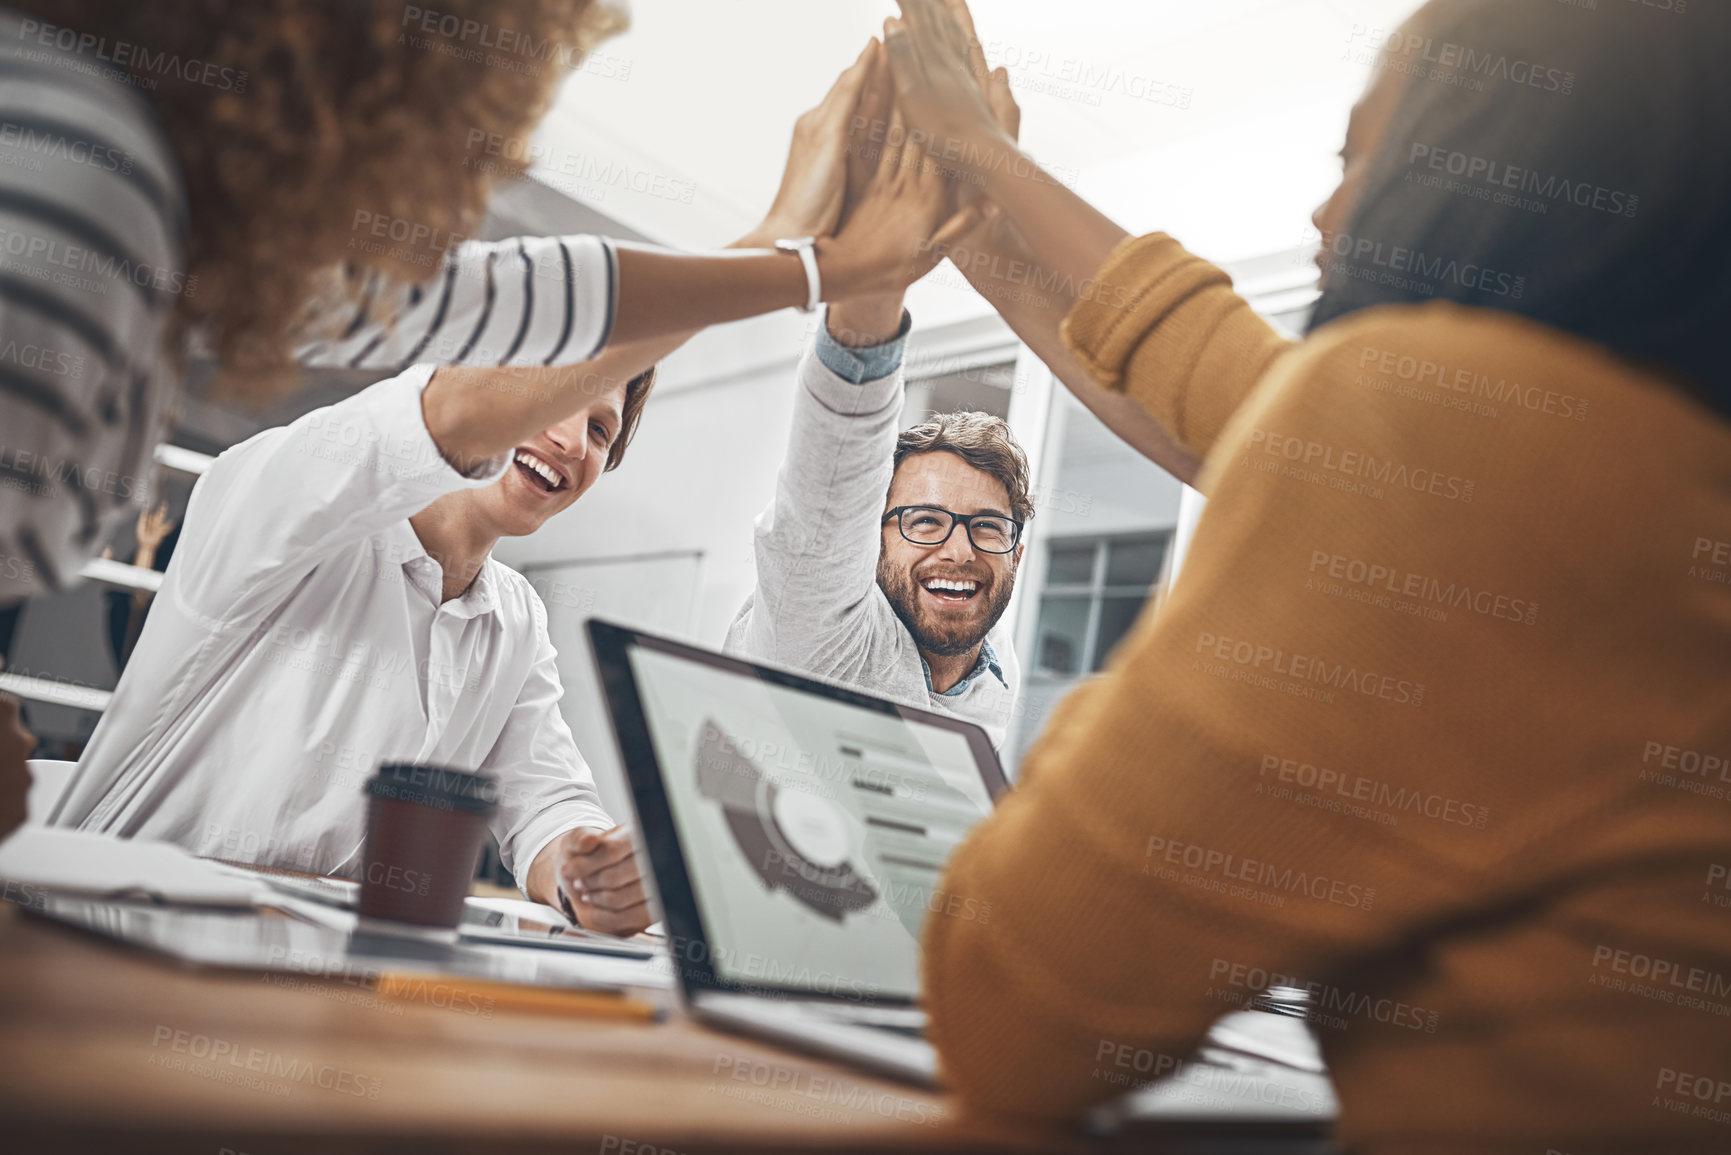 Buy stock photo Shot of colleagues high-fiving in the office